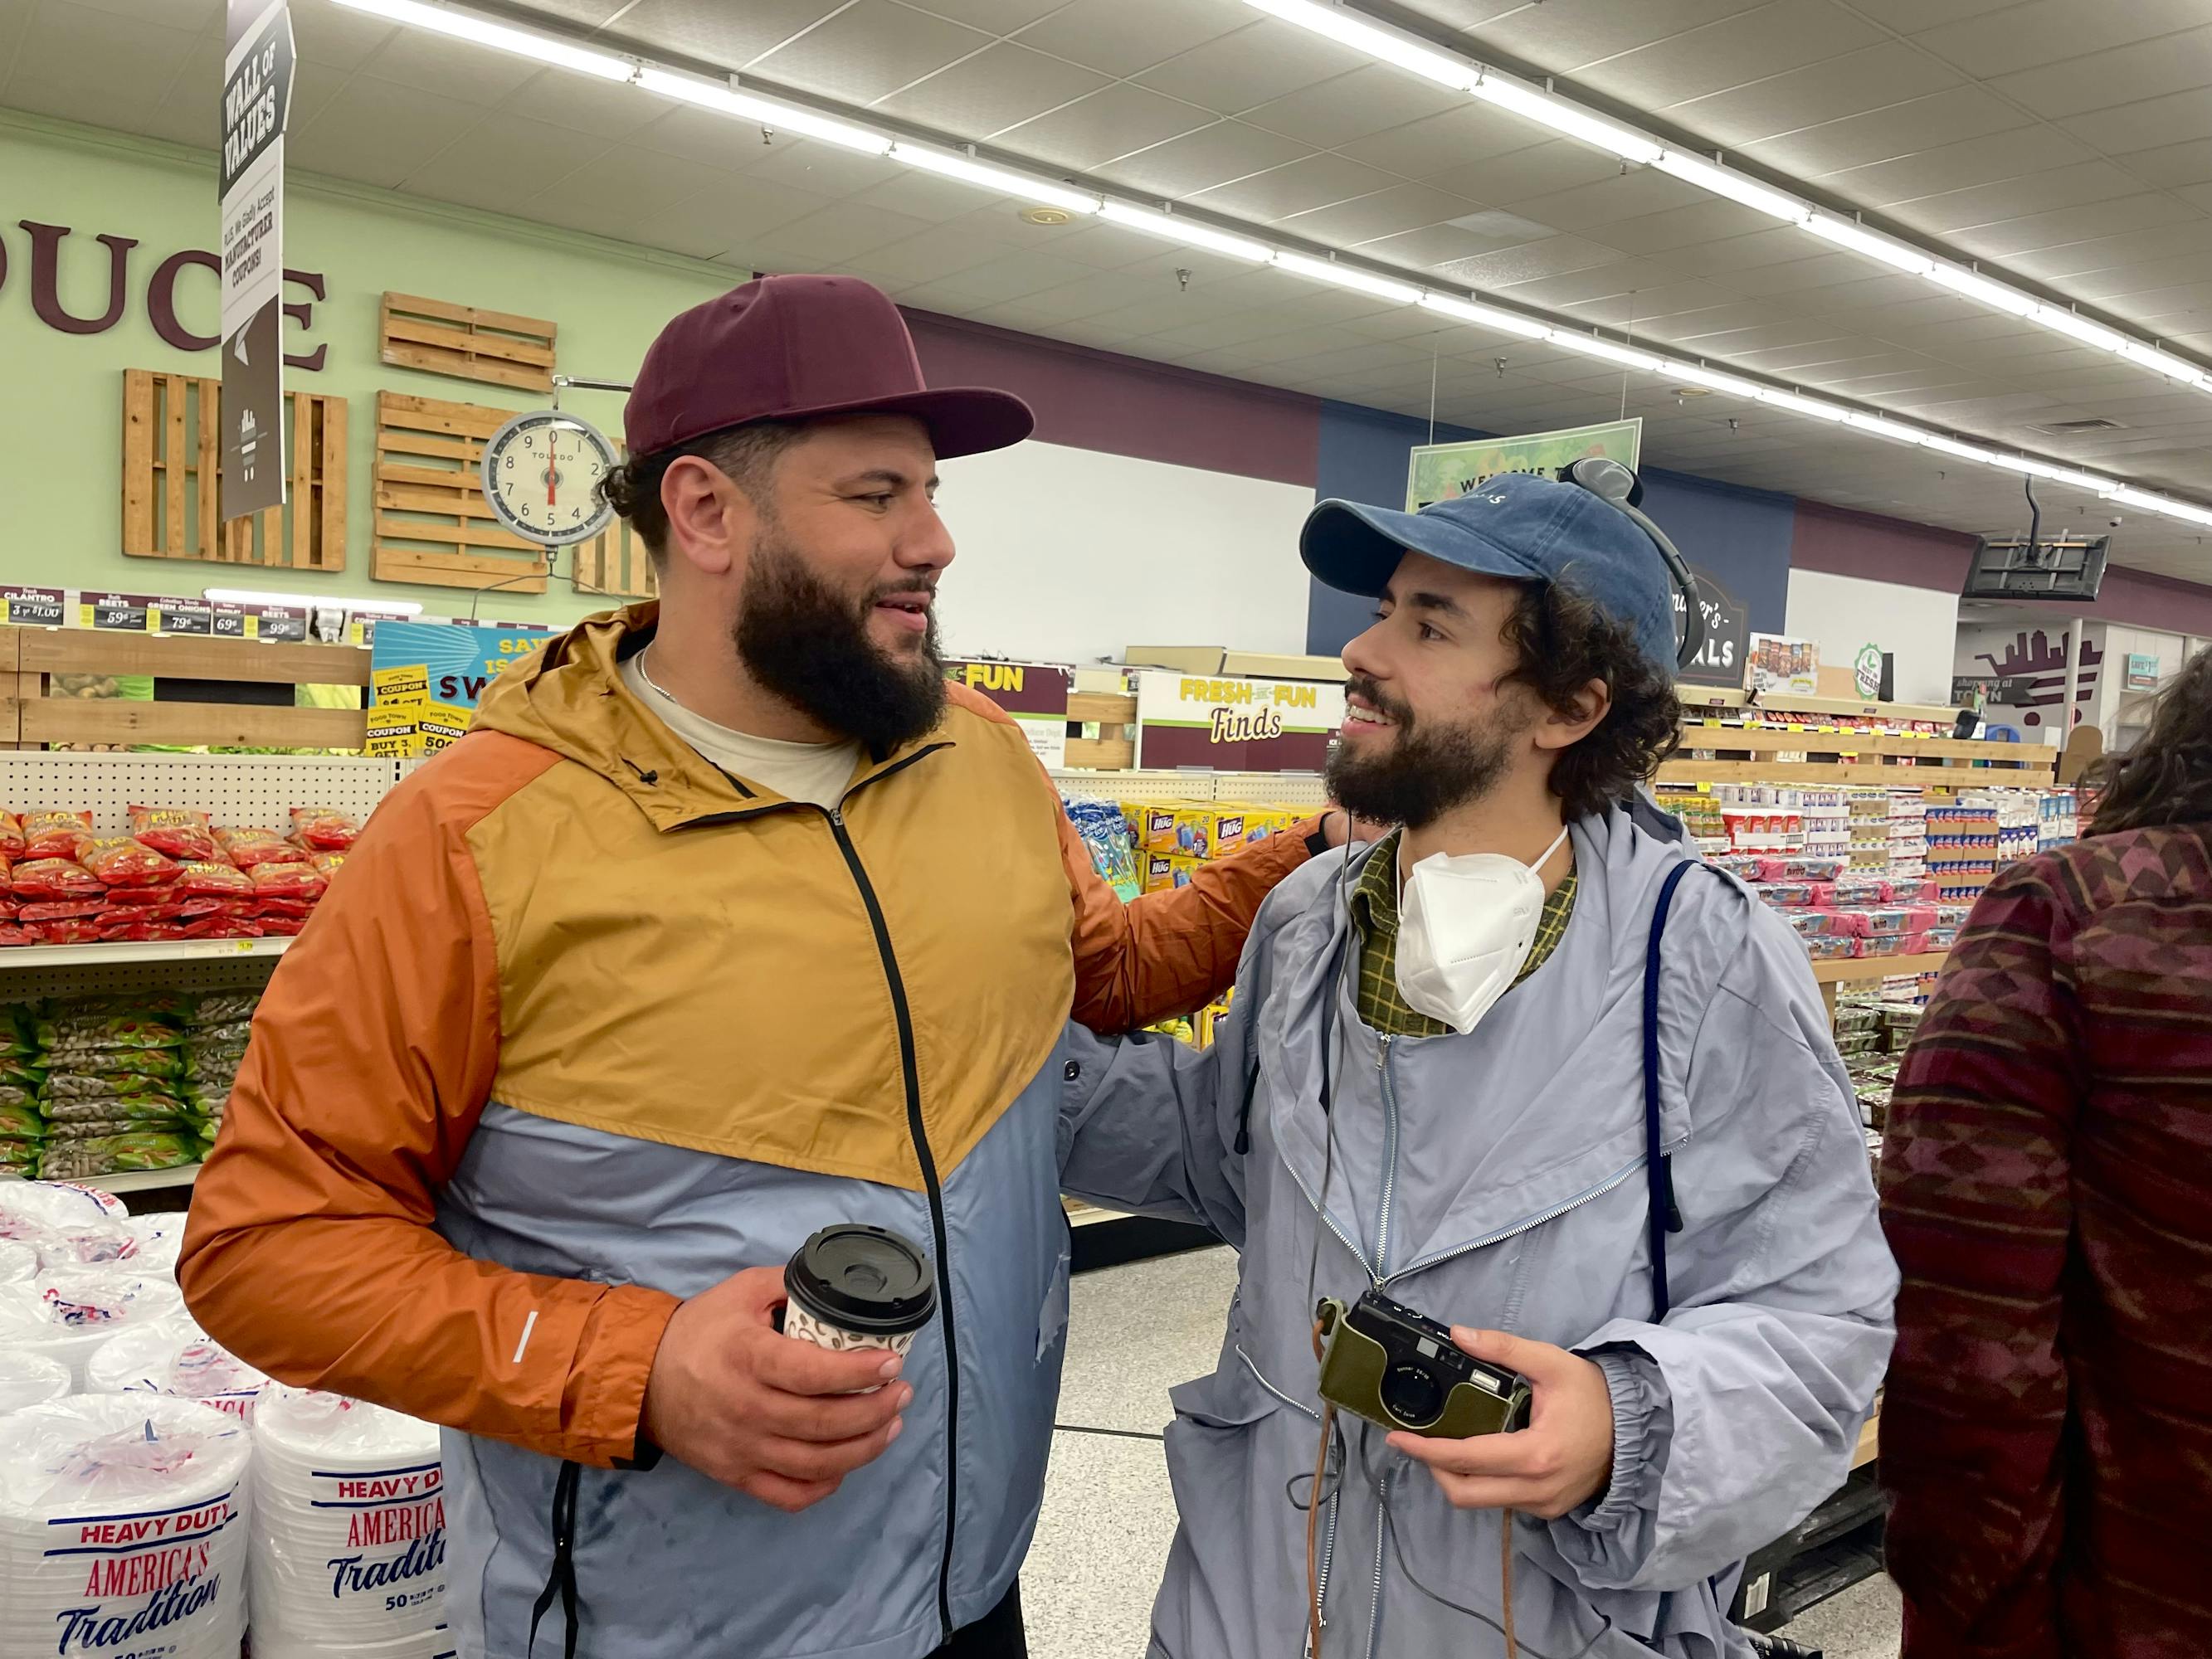 Mo Amer and Ramy Youssef stand together in a grocery market. They clap each other on the back and look very happy, making for a very sweet picture!